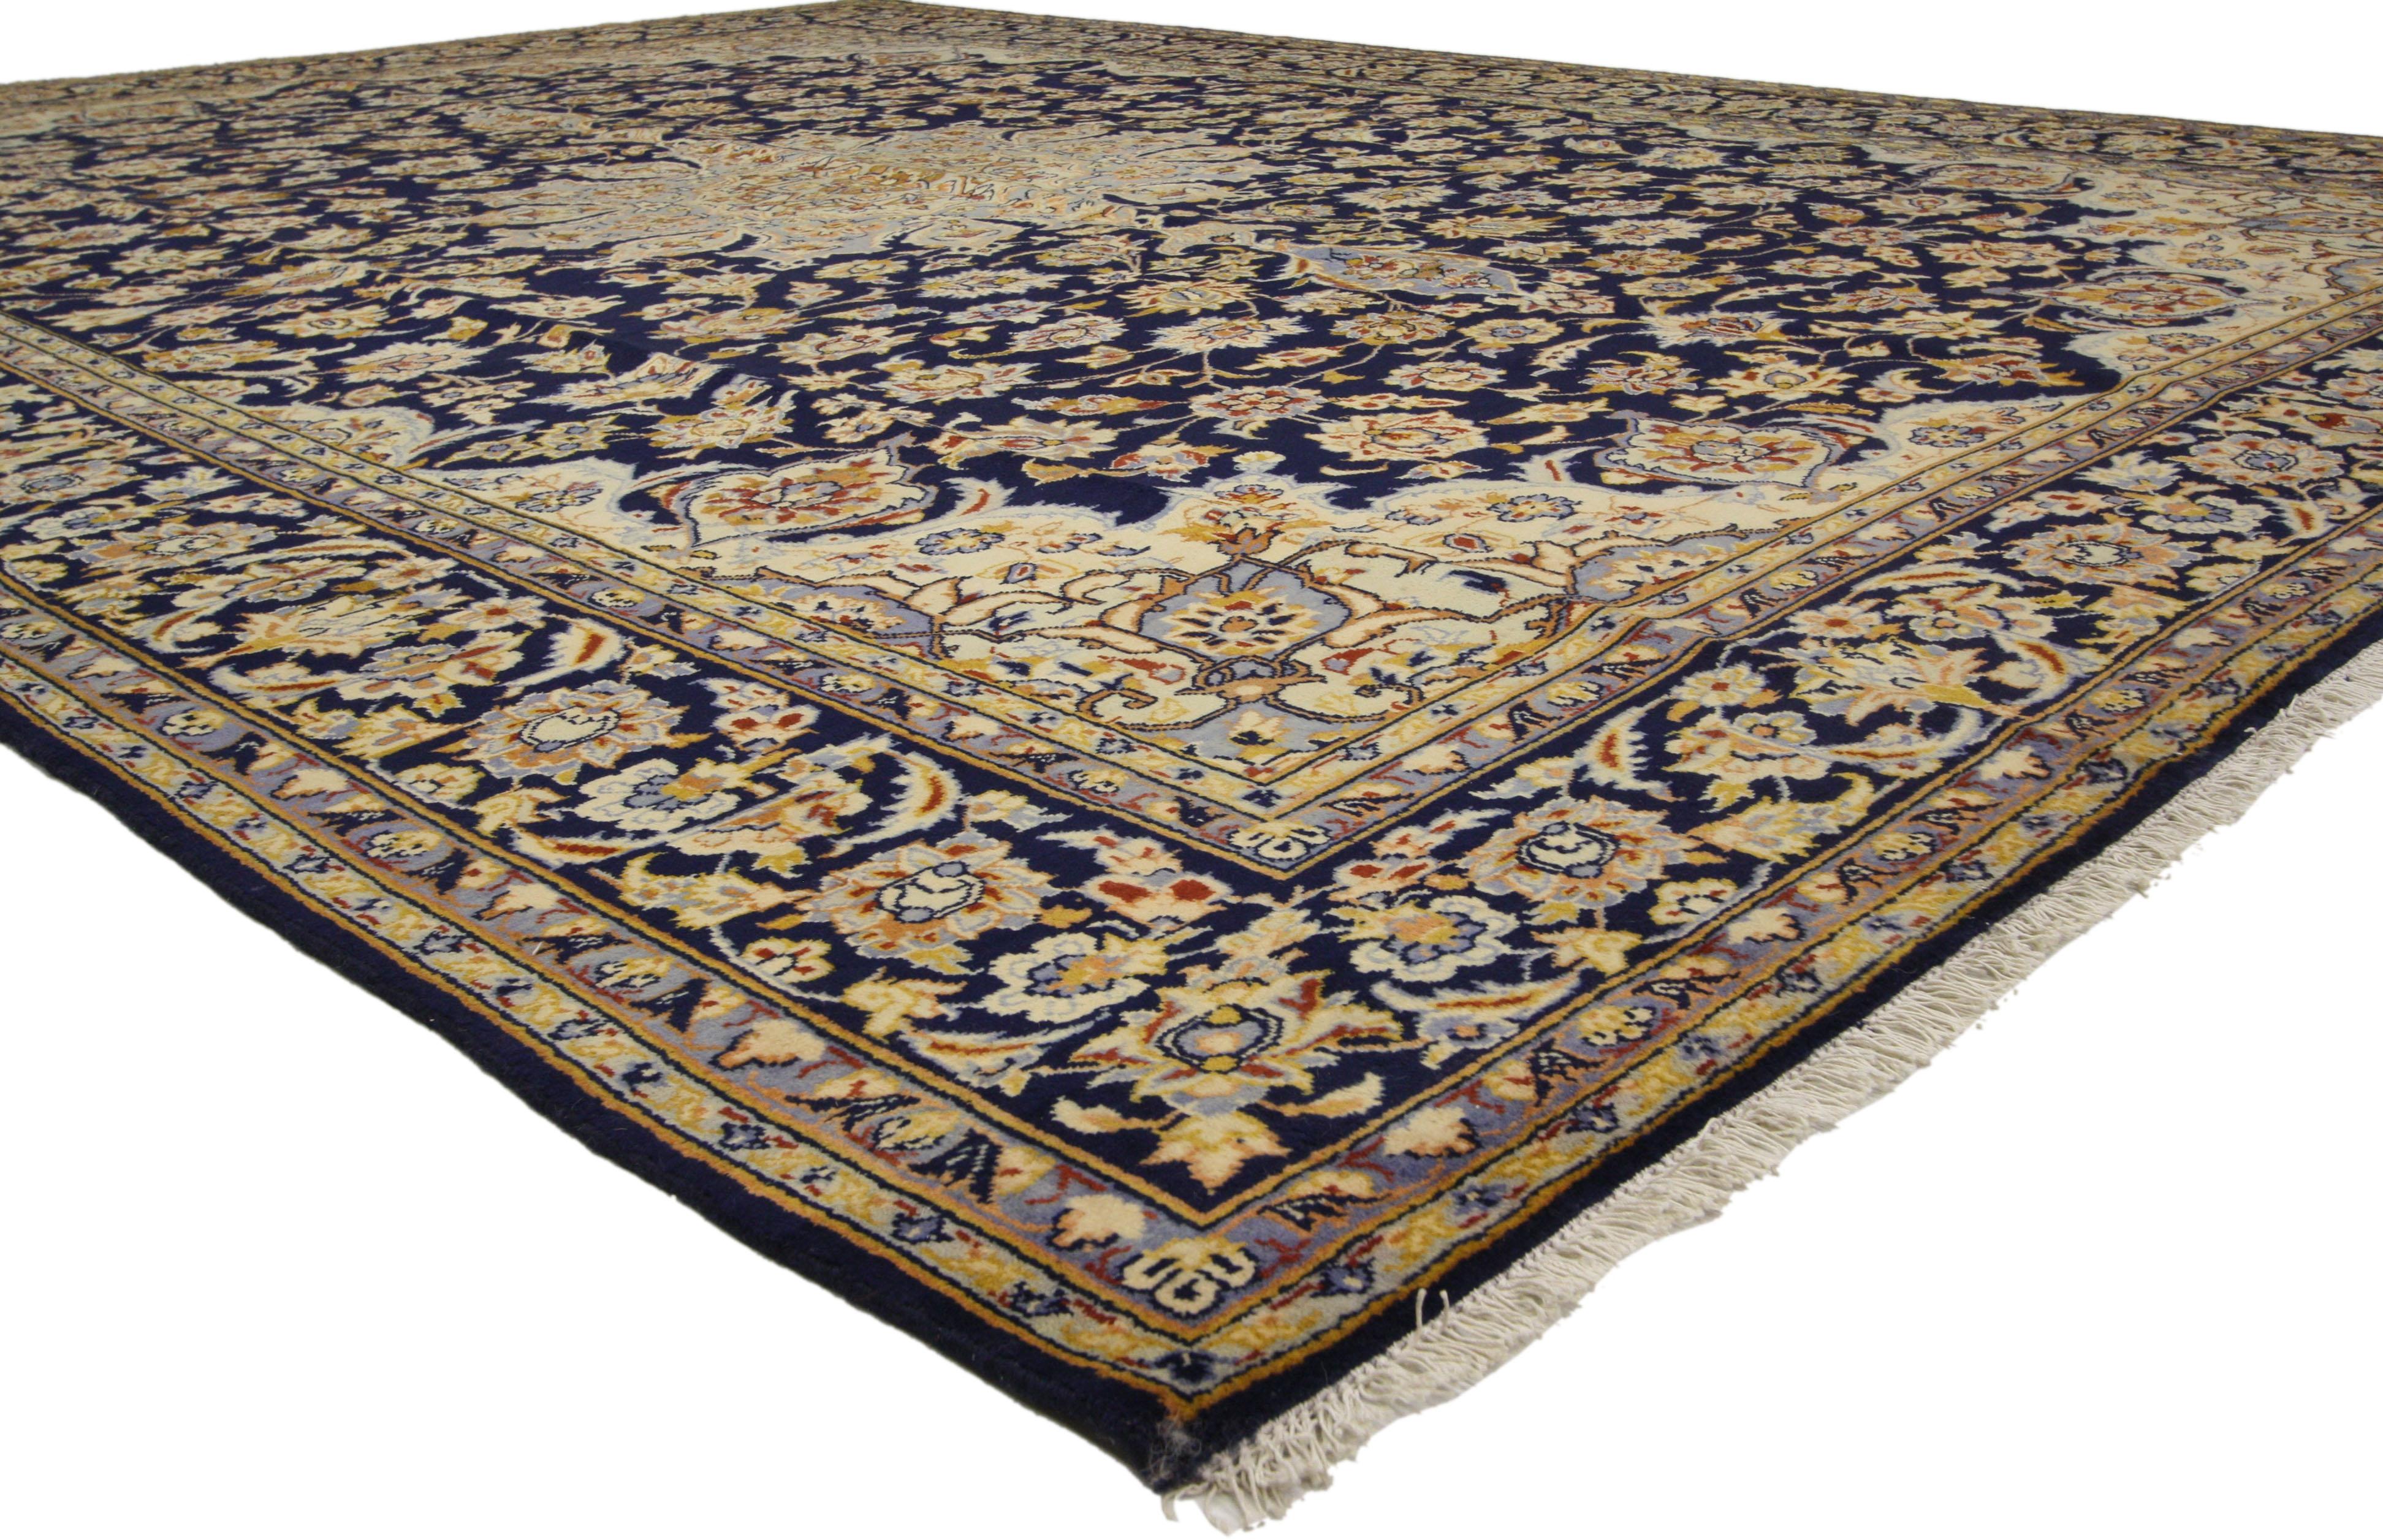 76013, vintage Persian Najafabad Area rug with Romantic Arabesque Baroque style. This hand knotted wool vintage Persian Najafabad rug features a central floral medallion and all-over floral pattern on an ink blue colored field. It is framed by